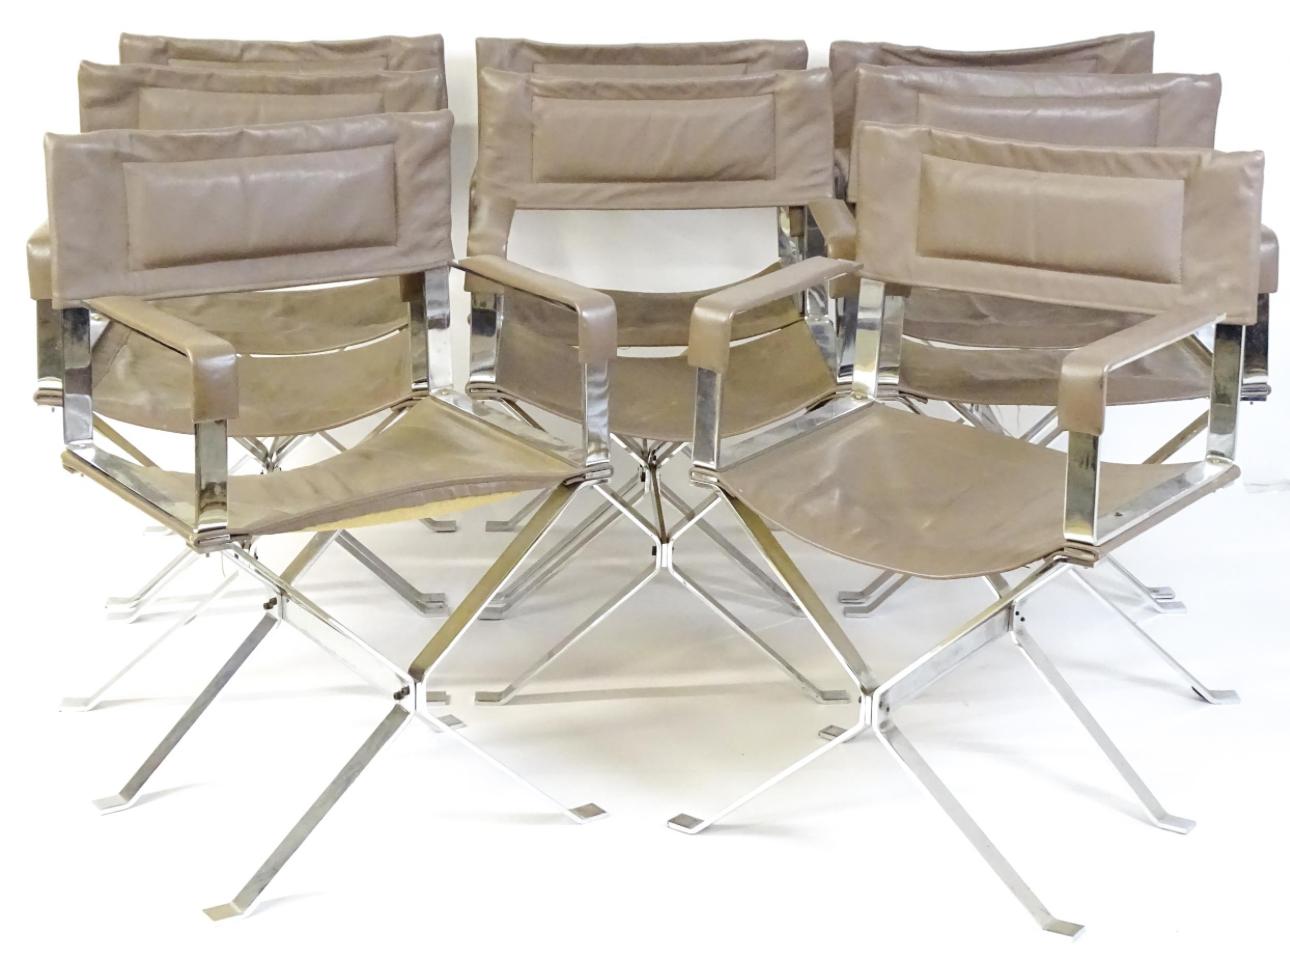 Remarkable set of 8 absolutely stylish director's armchairs with sleek polished  X frames for added support and stability, with fine Italian grey stitched leather sling backs and seats. Highly decorative comfortable chairs, designed in the manner of